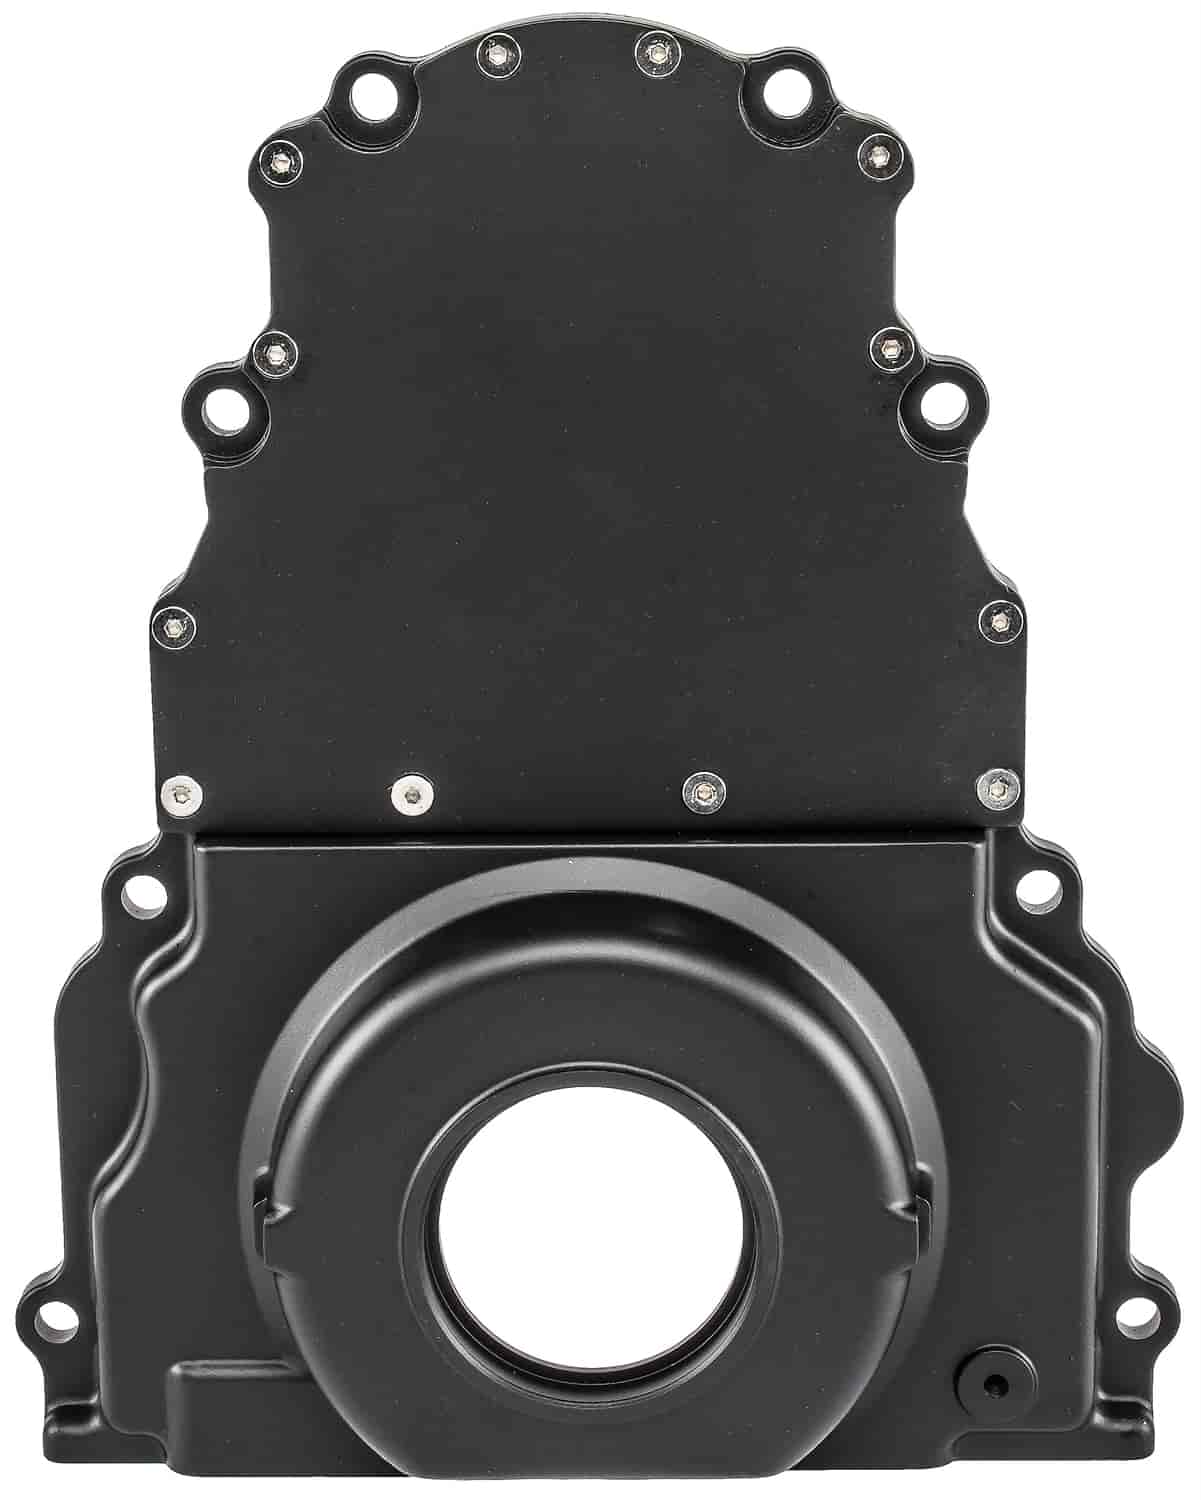 Timing Cover for GM LS Engines up to Gen IV with Rear Mounted Cam Sensors [Black]